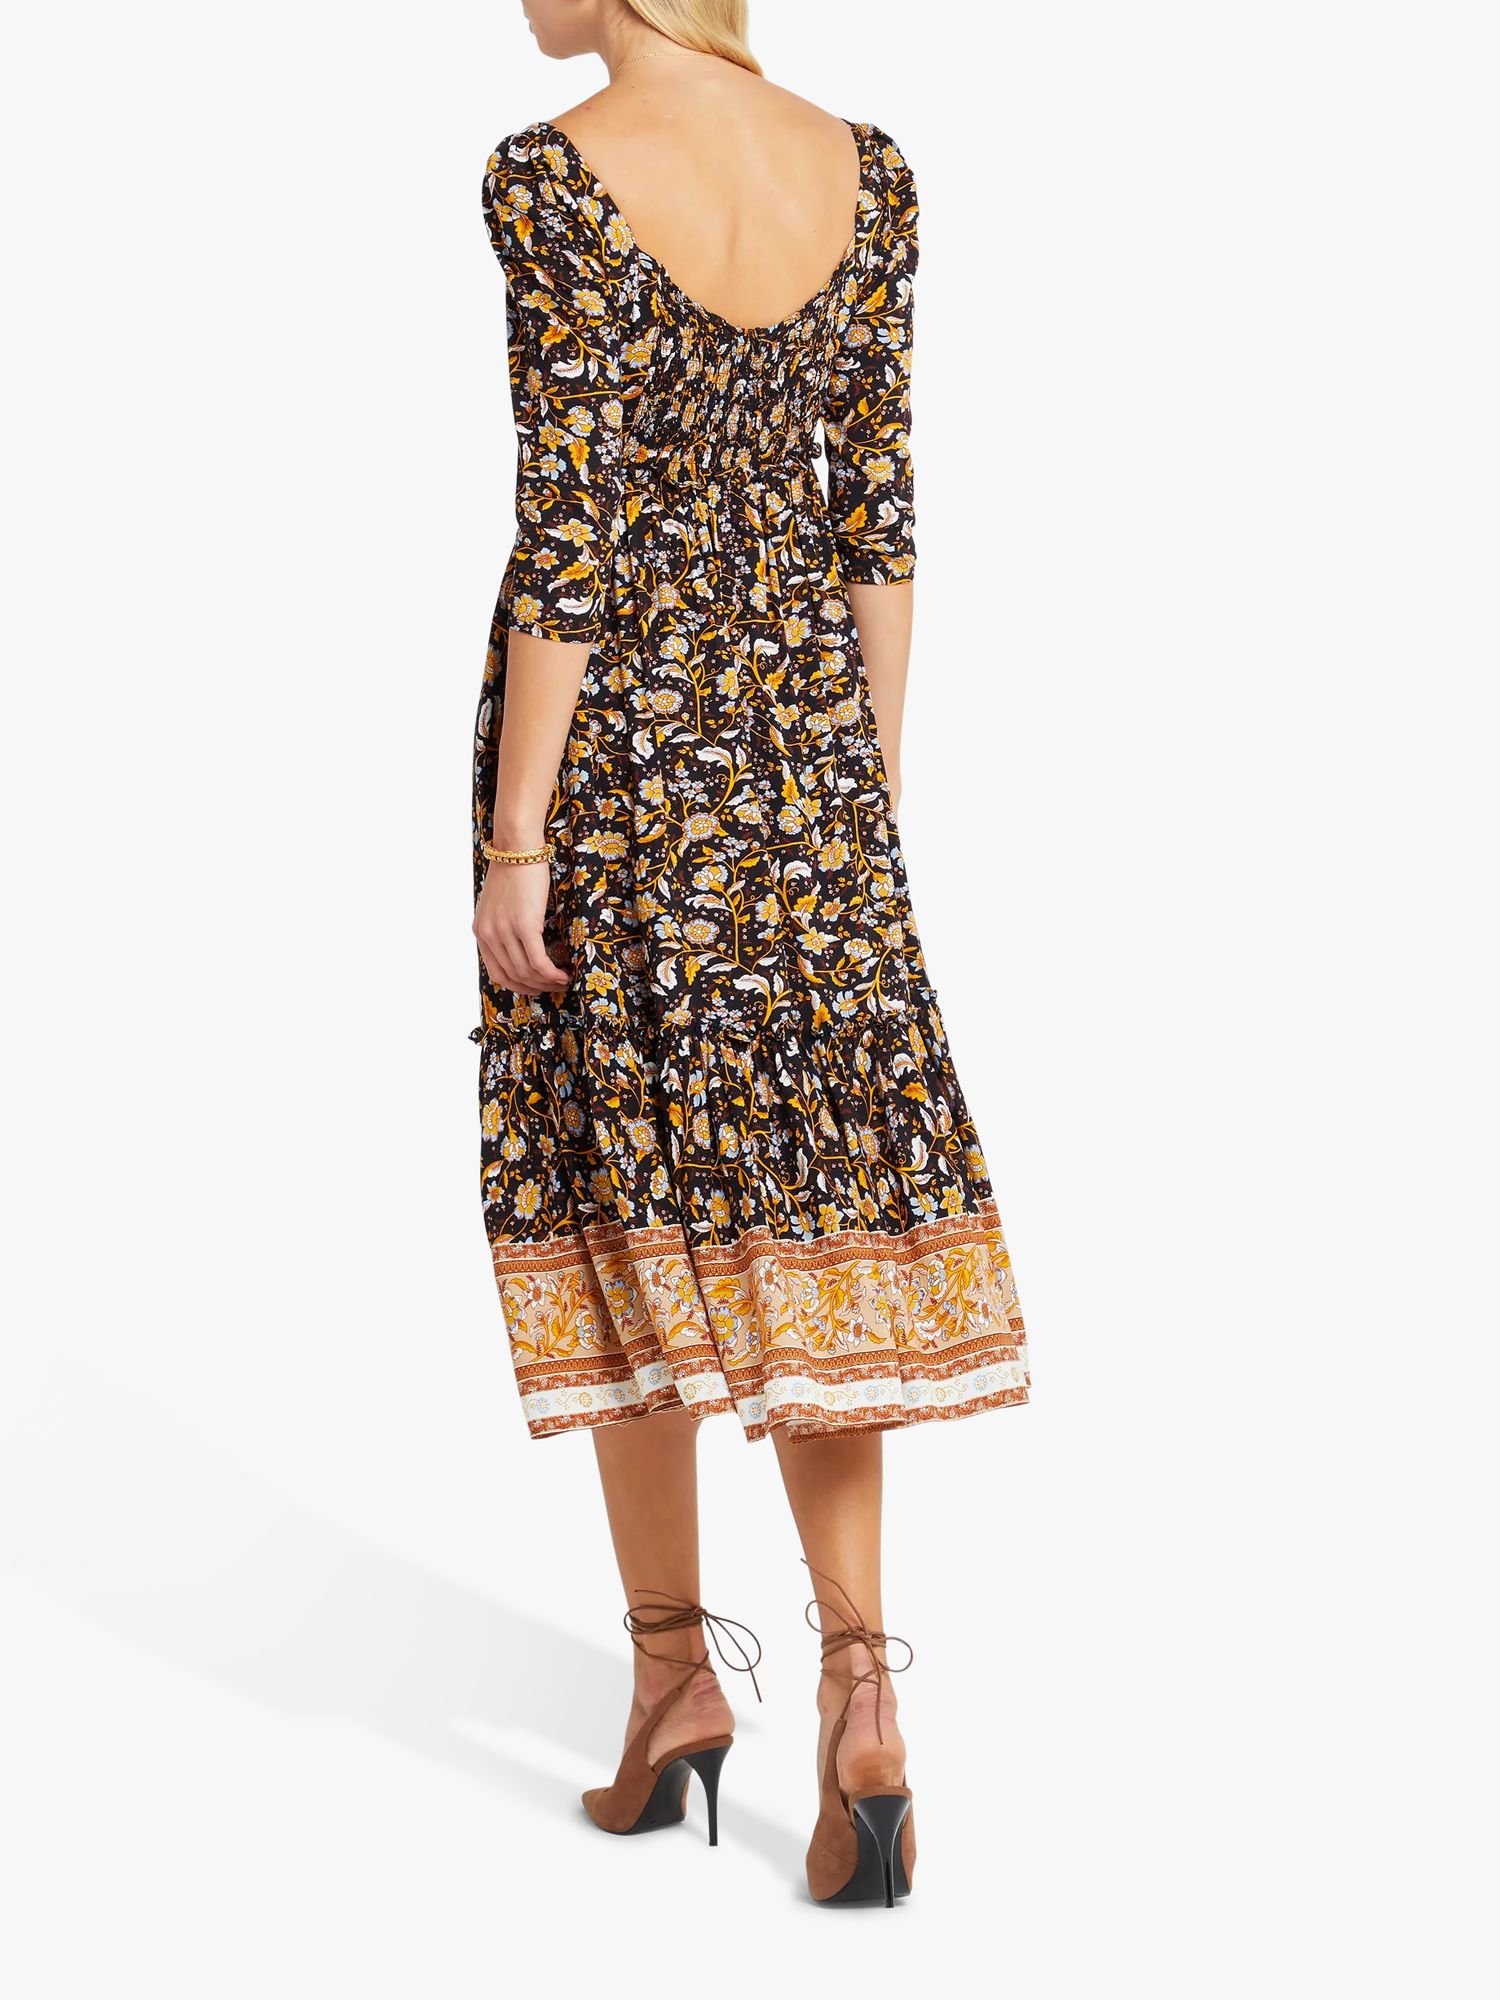 o.p.t Willow Midi Dress, Brown Floral, S